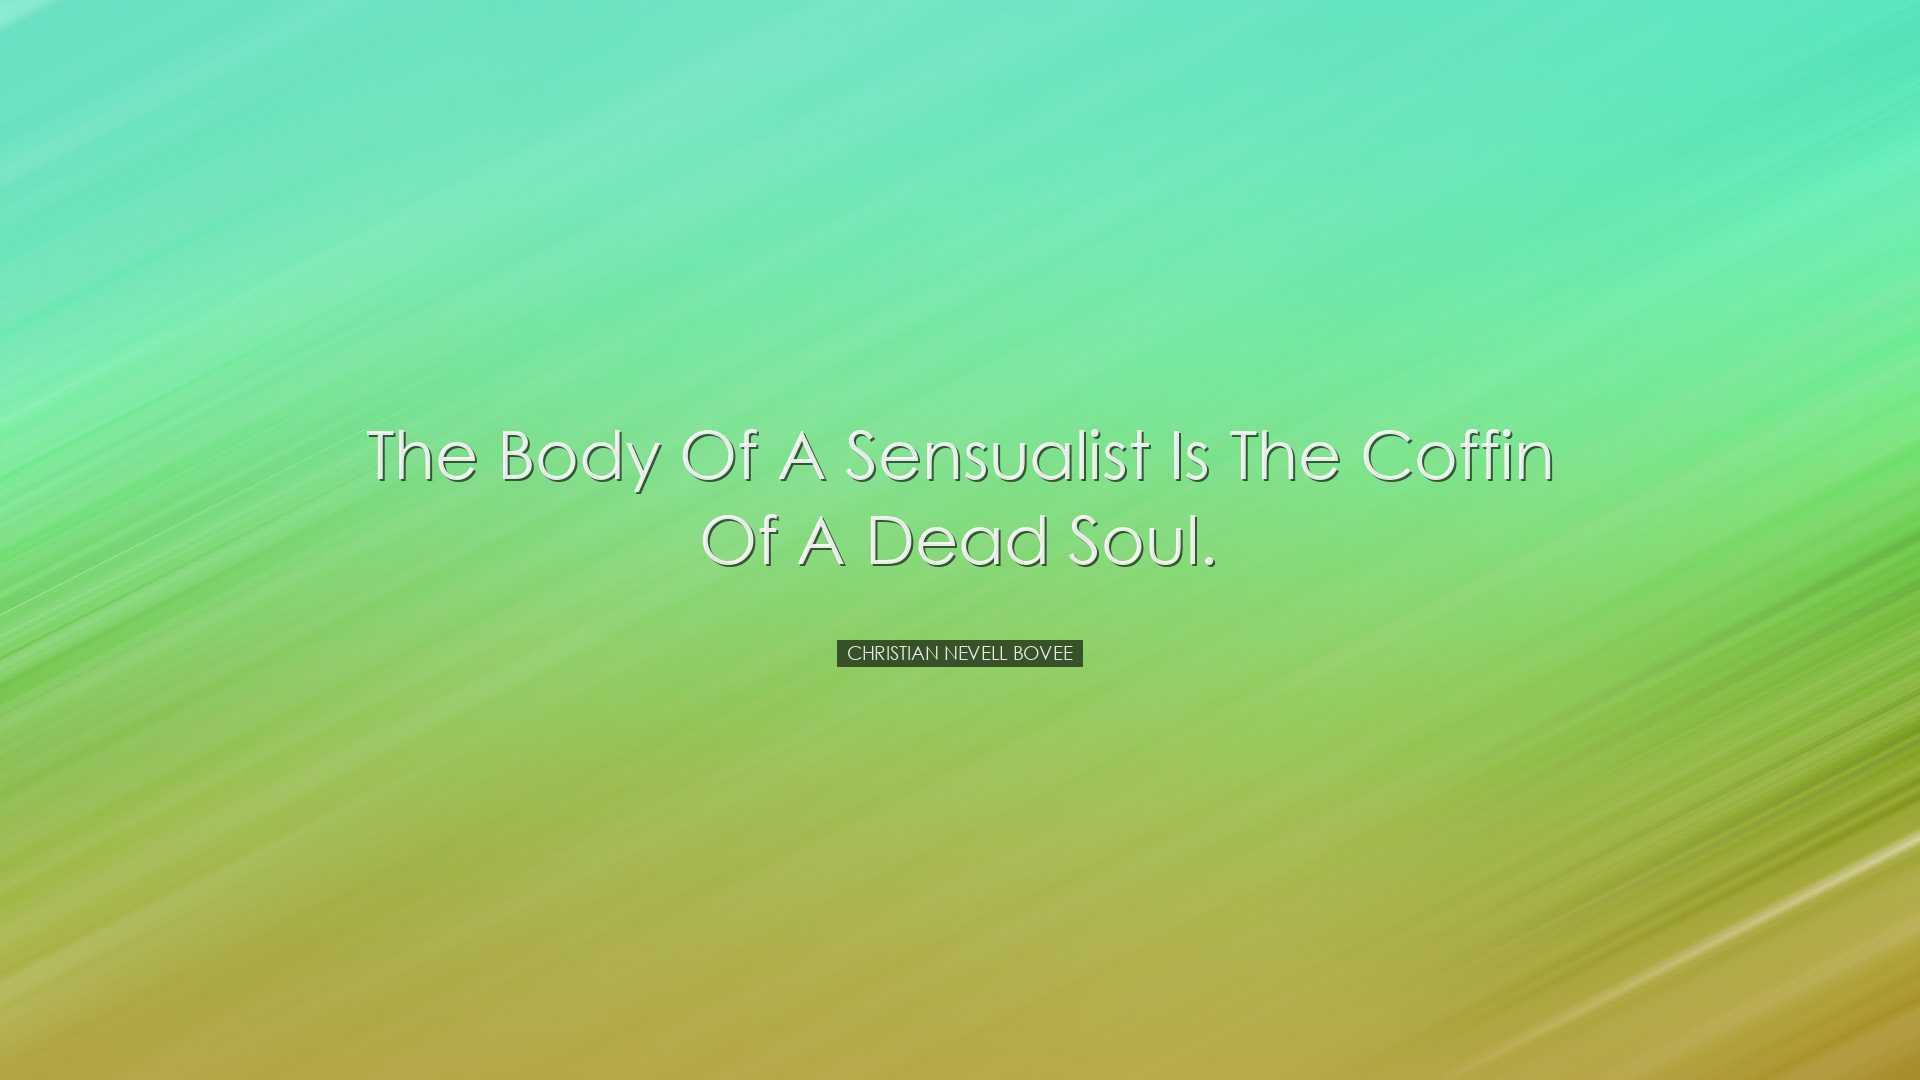 The body of a sensualist is the coffin of a dead soul. - Christian